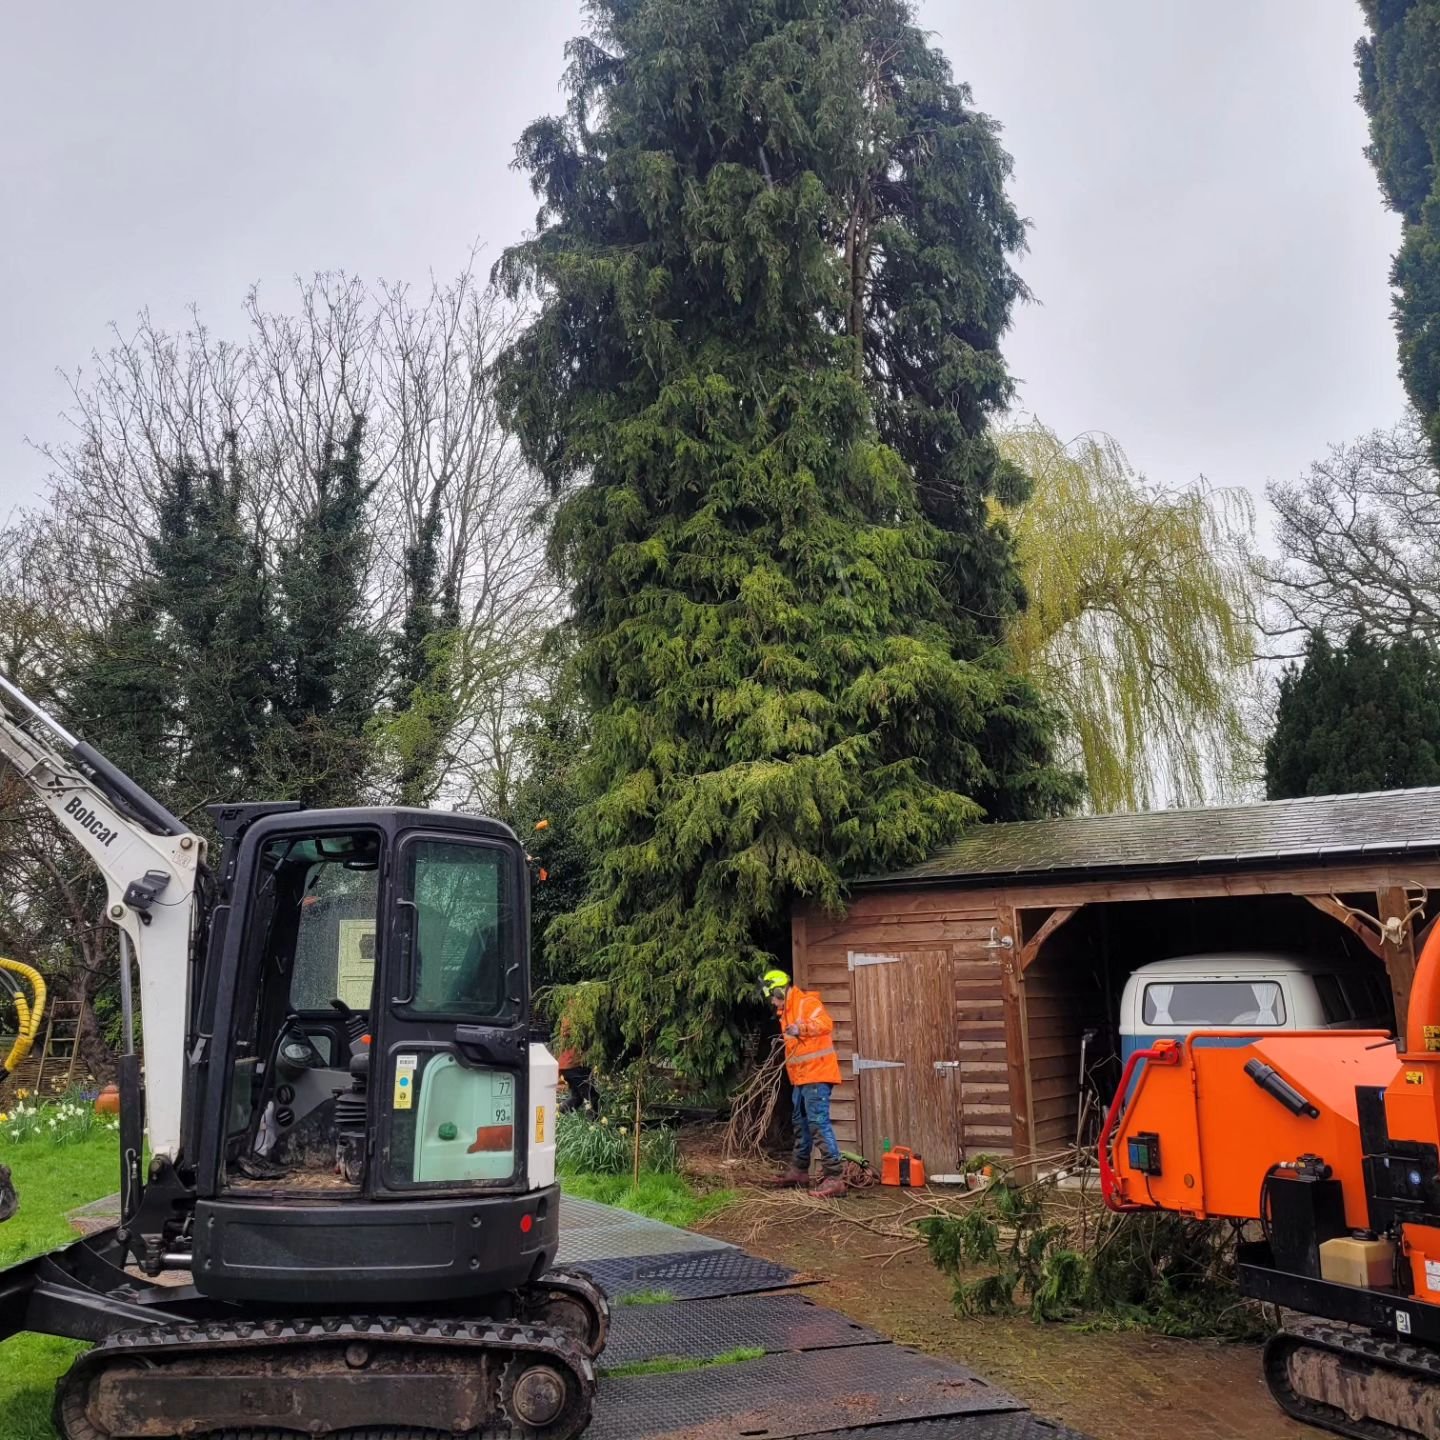 A job from last month, removing this conifer for a client. A very efficient day with the right kit. Ground protection mats have proven invaluable this winter!
.
.
.
#tree #treesurgeon #local #westfelton #oswestry #shropshire #arborist #garden #ground